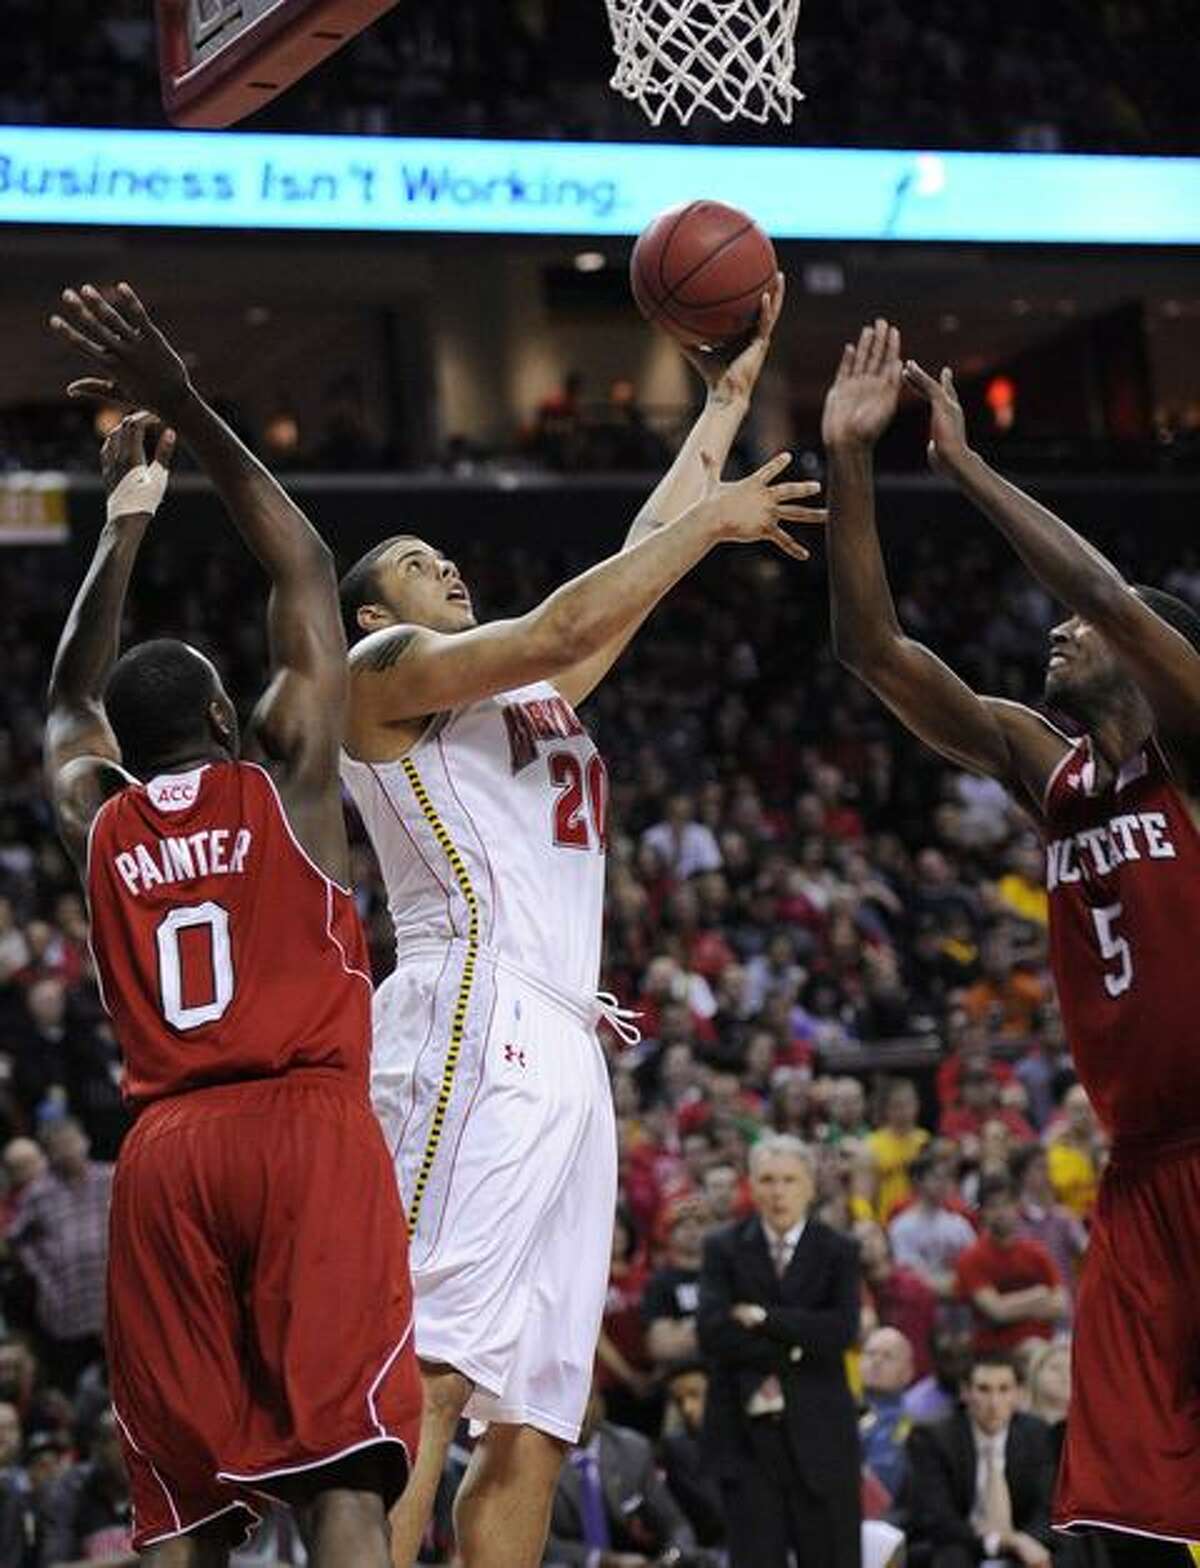 Maryland forward Jordan Williams, center, goes to the basket against North Carolina State's DeShawn Painter (0) and C.J. Leslie (5) during the second half of an NCAA college basketball game, Sunday, Feb. 20, 2011, in College Park, Md. Maryland won 87-80. (AP Photo/Nick Wass)